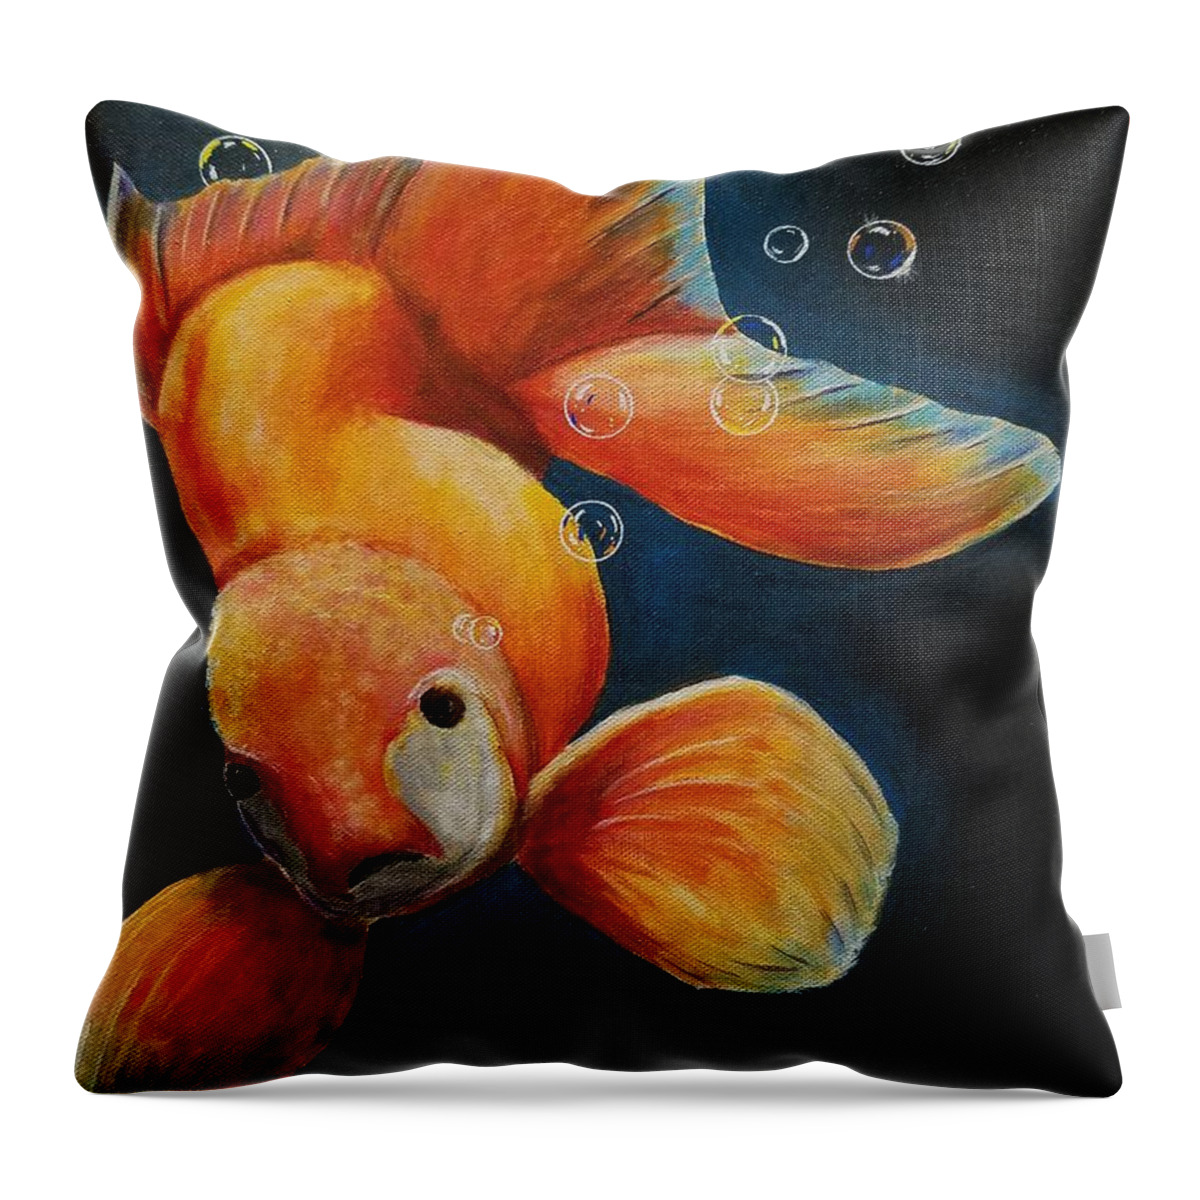 Goldfish Throw Pillow featuring the painting Bob by Jimmy Chuck Smith